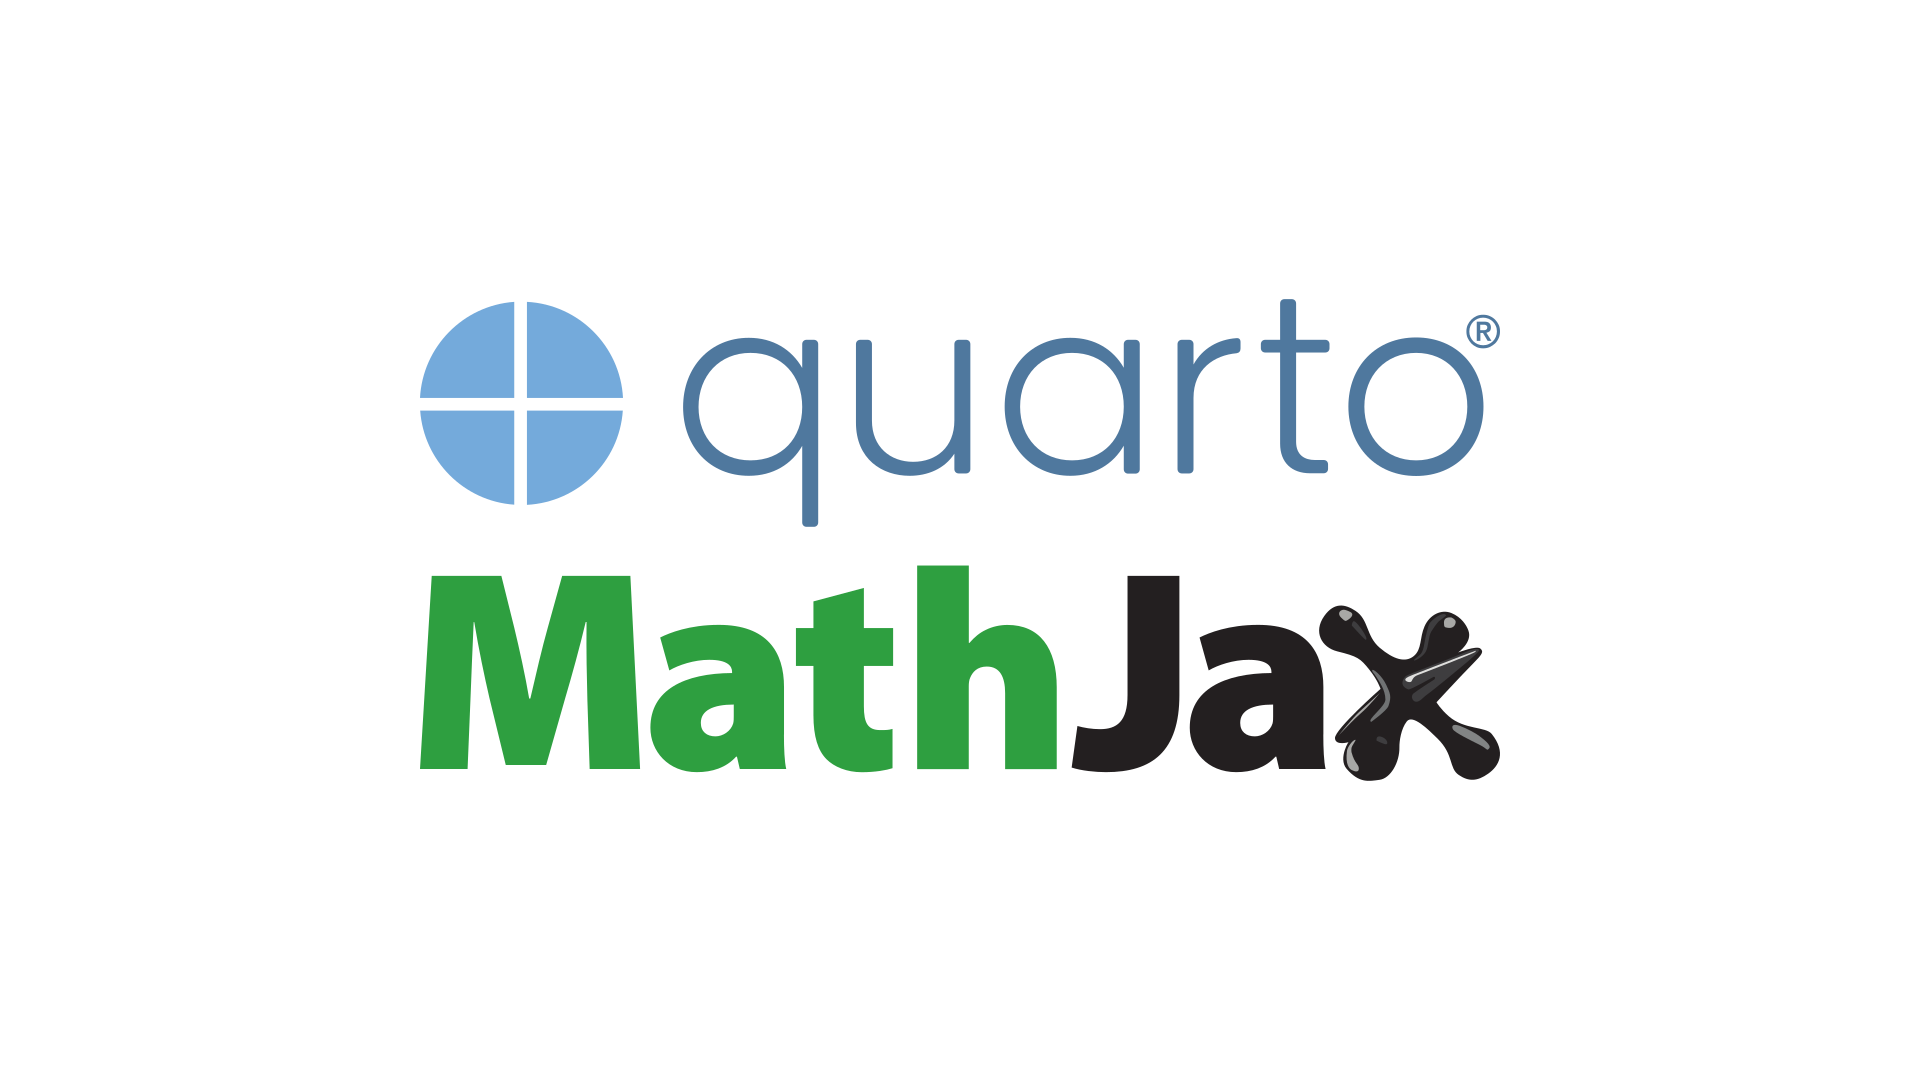 Screenshot of an html rendered by Quarto. It contains Quarto MathJax as a title, followed by an equation of rank bold upper sigma.
